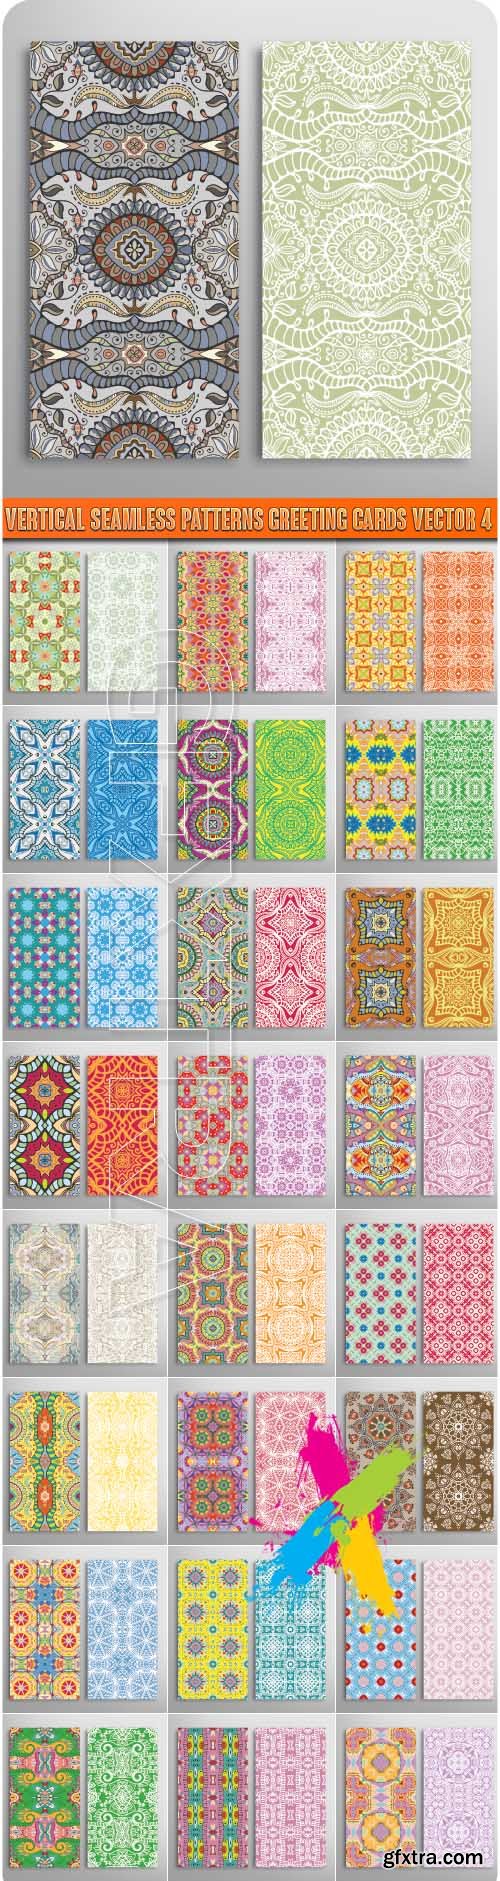 Vertical seamless patterns greeting cards vector 4